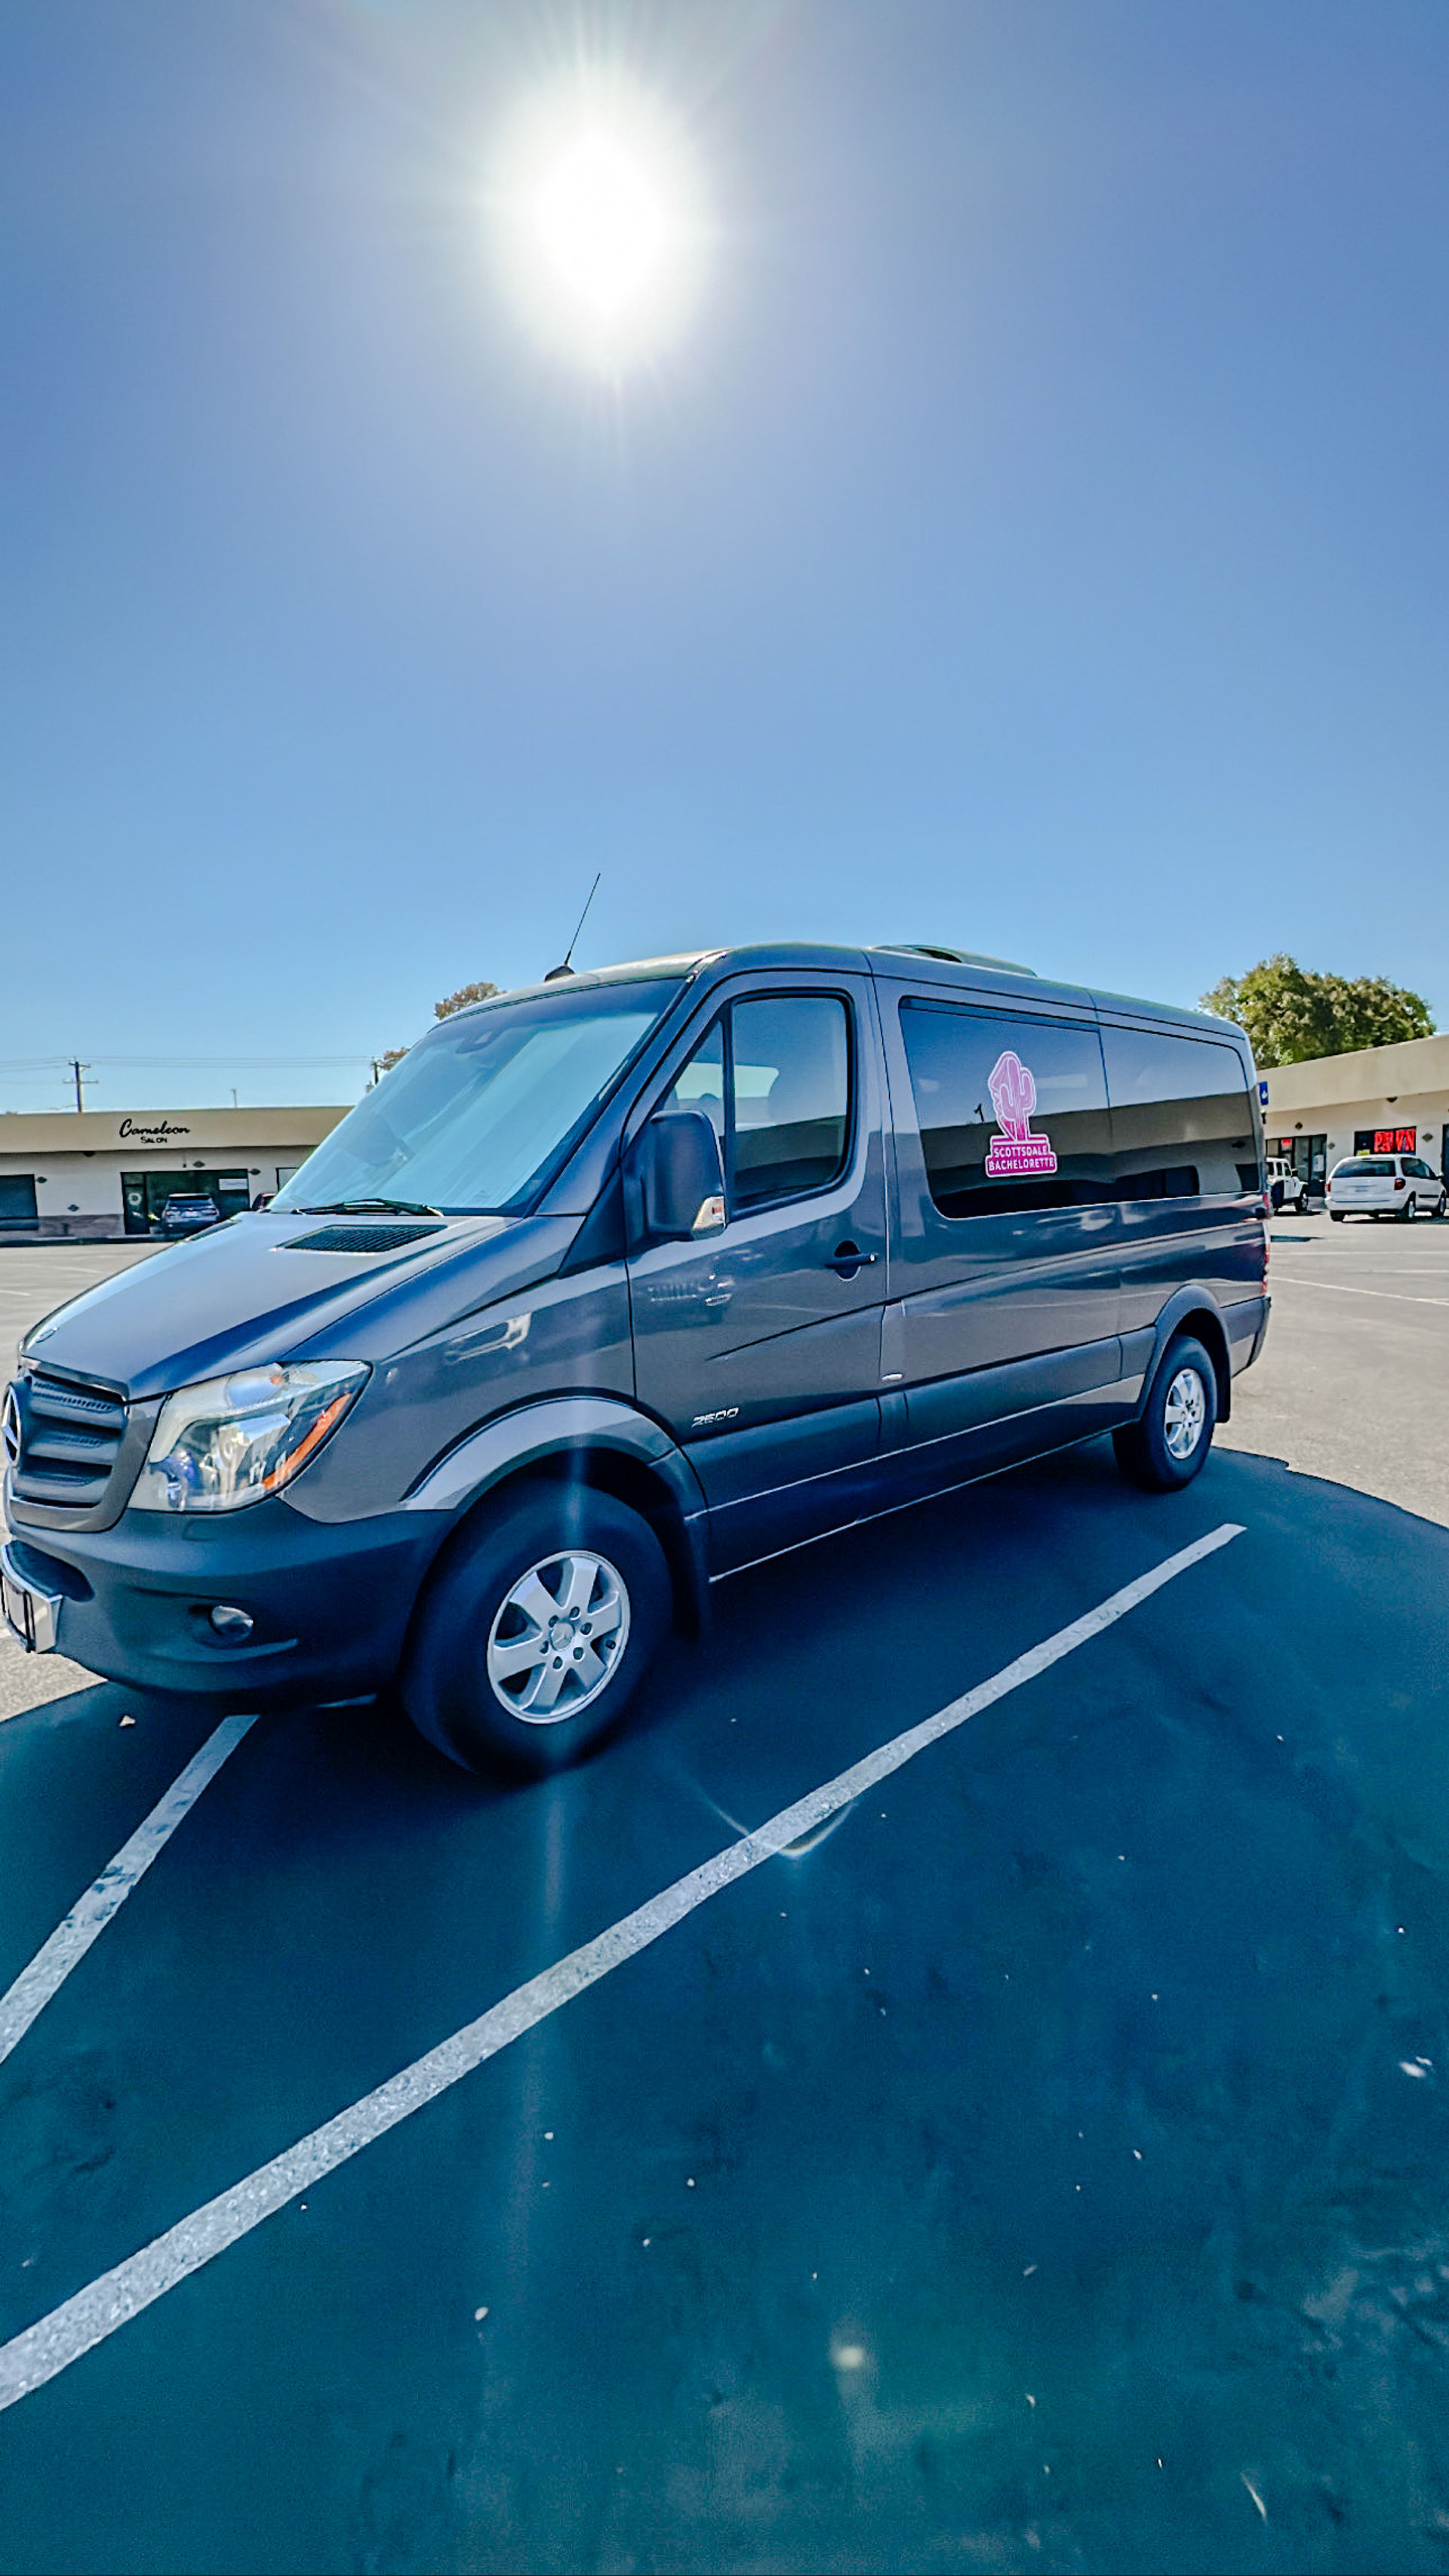 VIP Limo Service: Mercedes-Benz Party Bus Gallery